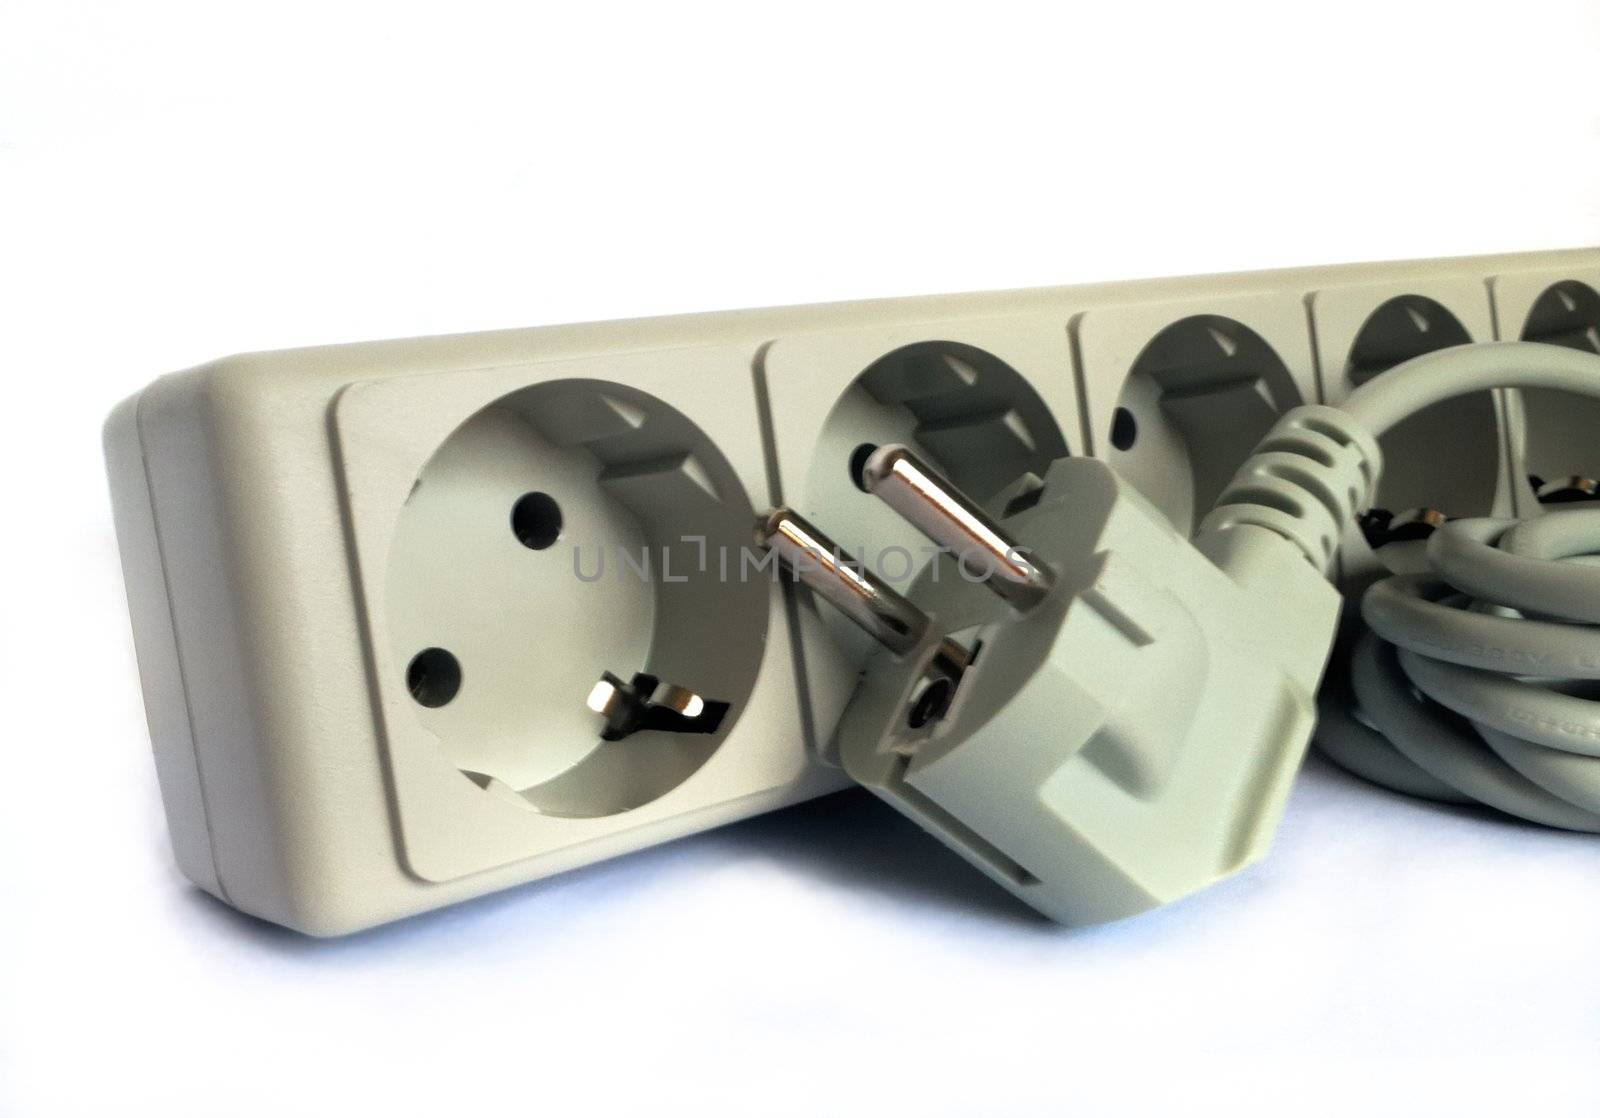 Electric plug and outlet in gray tone on white